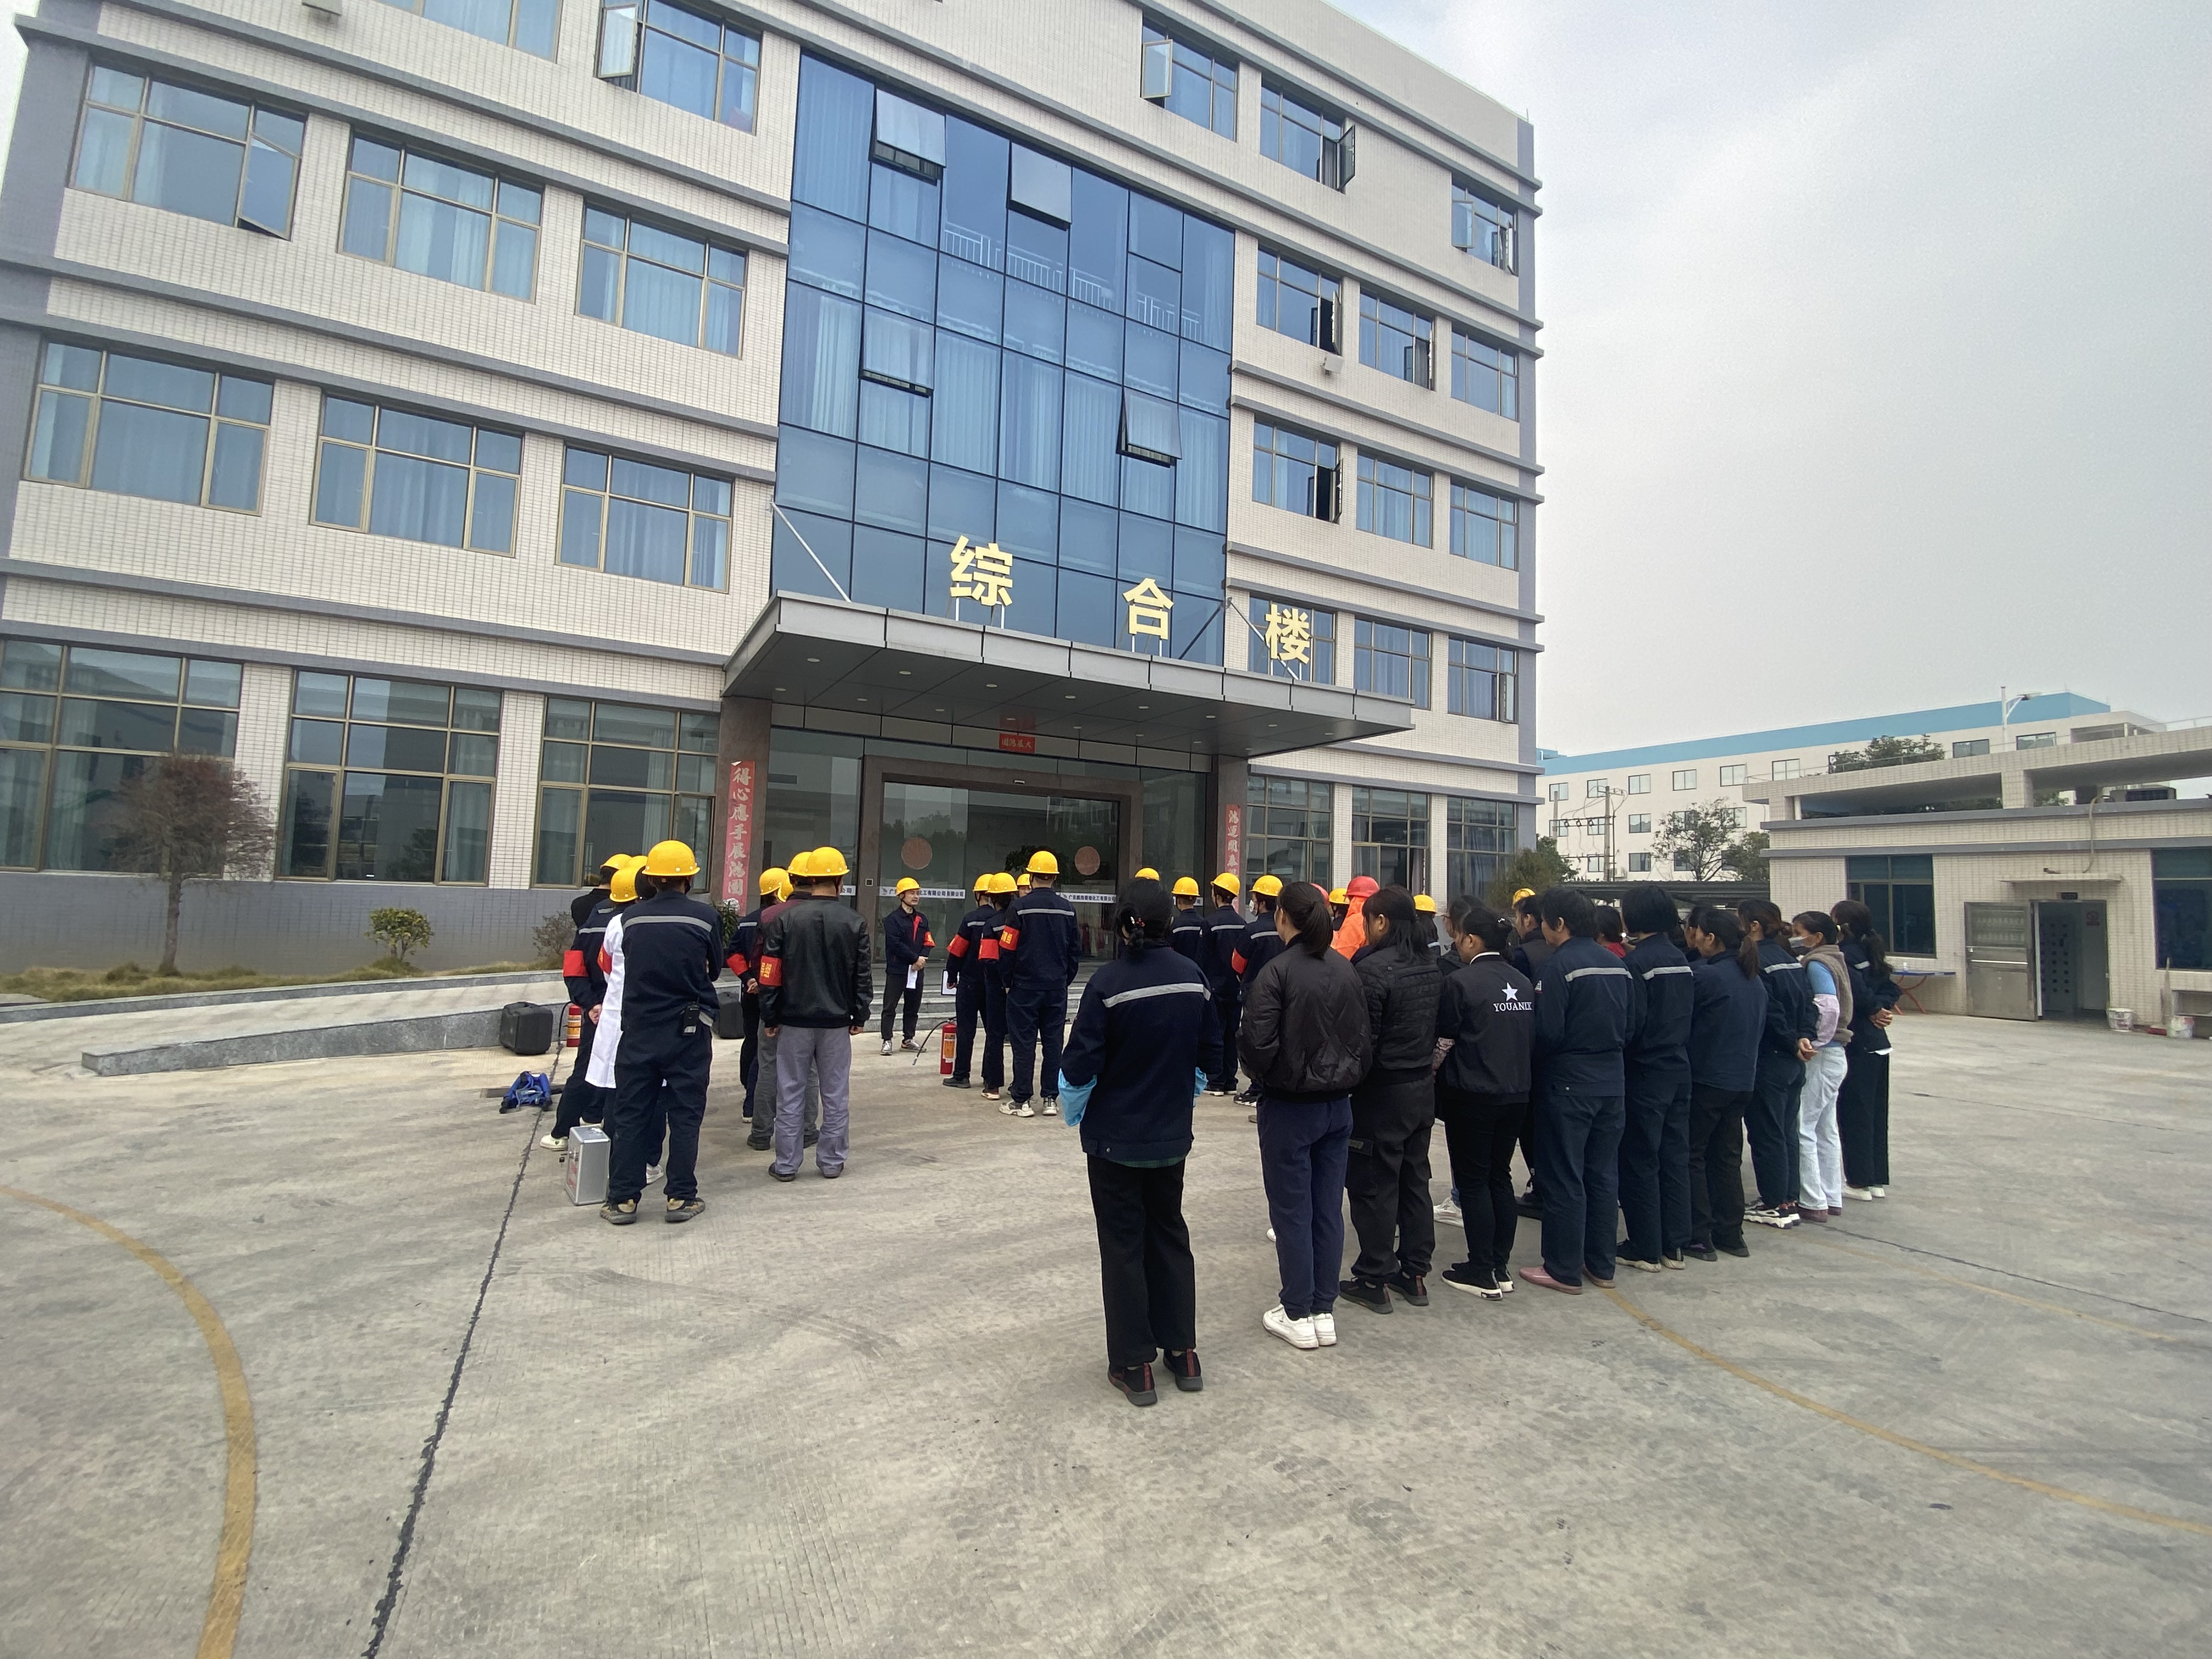 Pengwei丨Formal Fire Drill Was Held on December 12th,2021